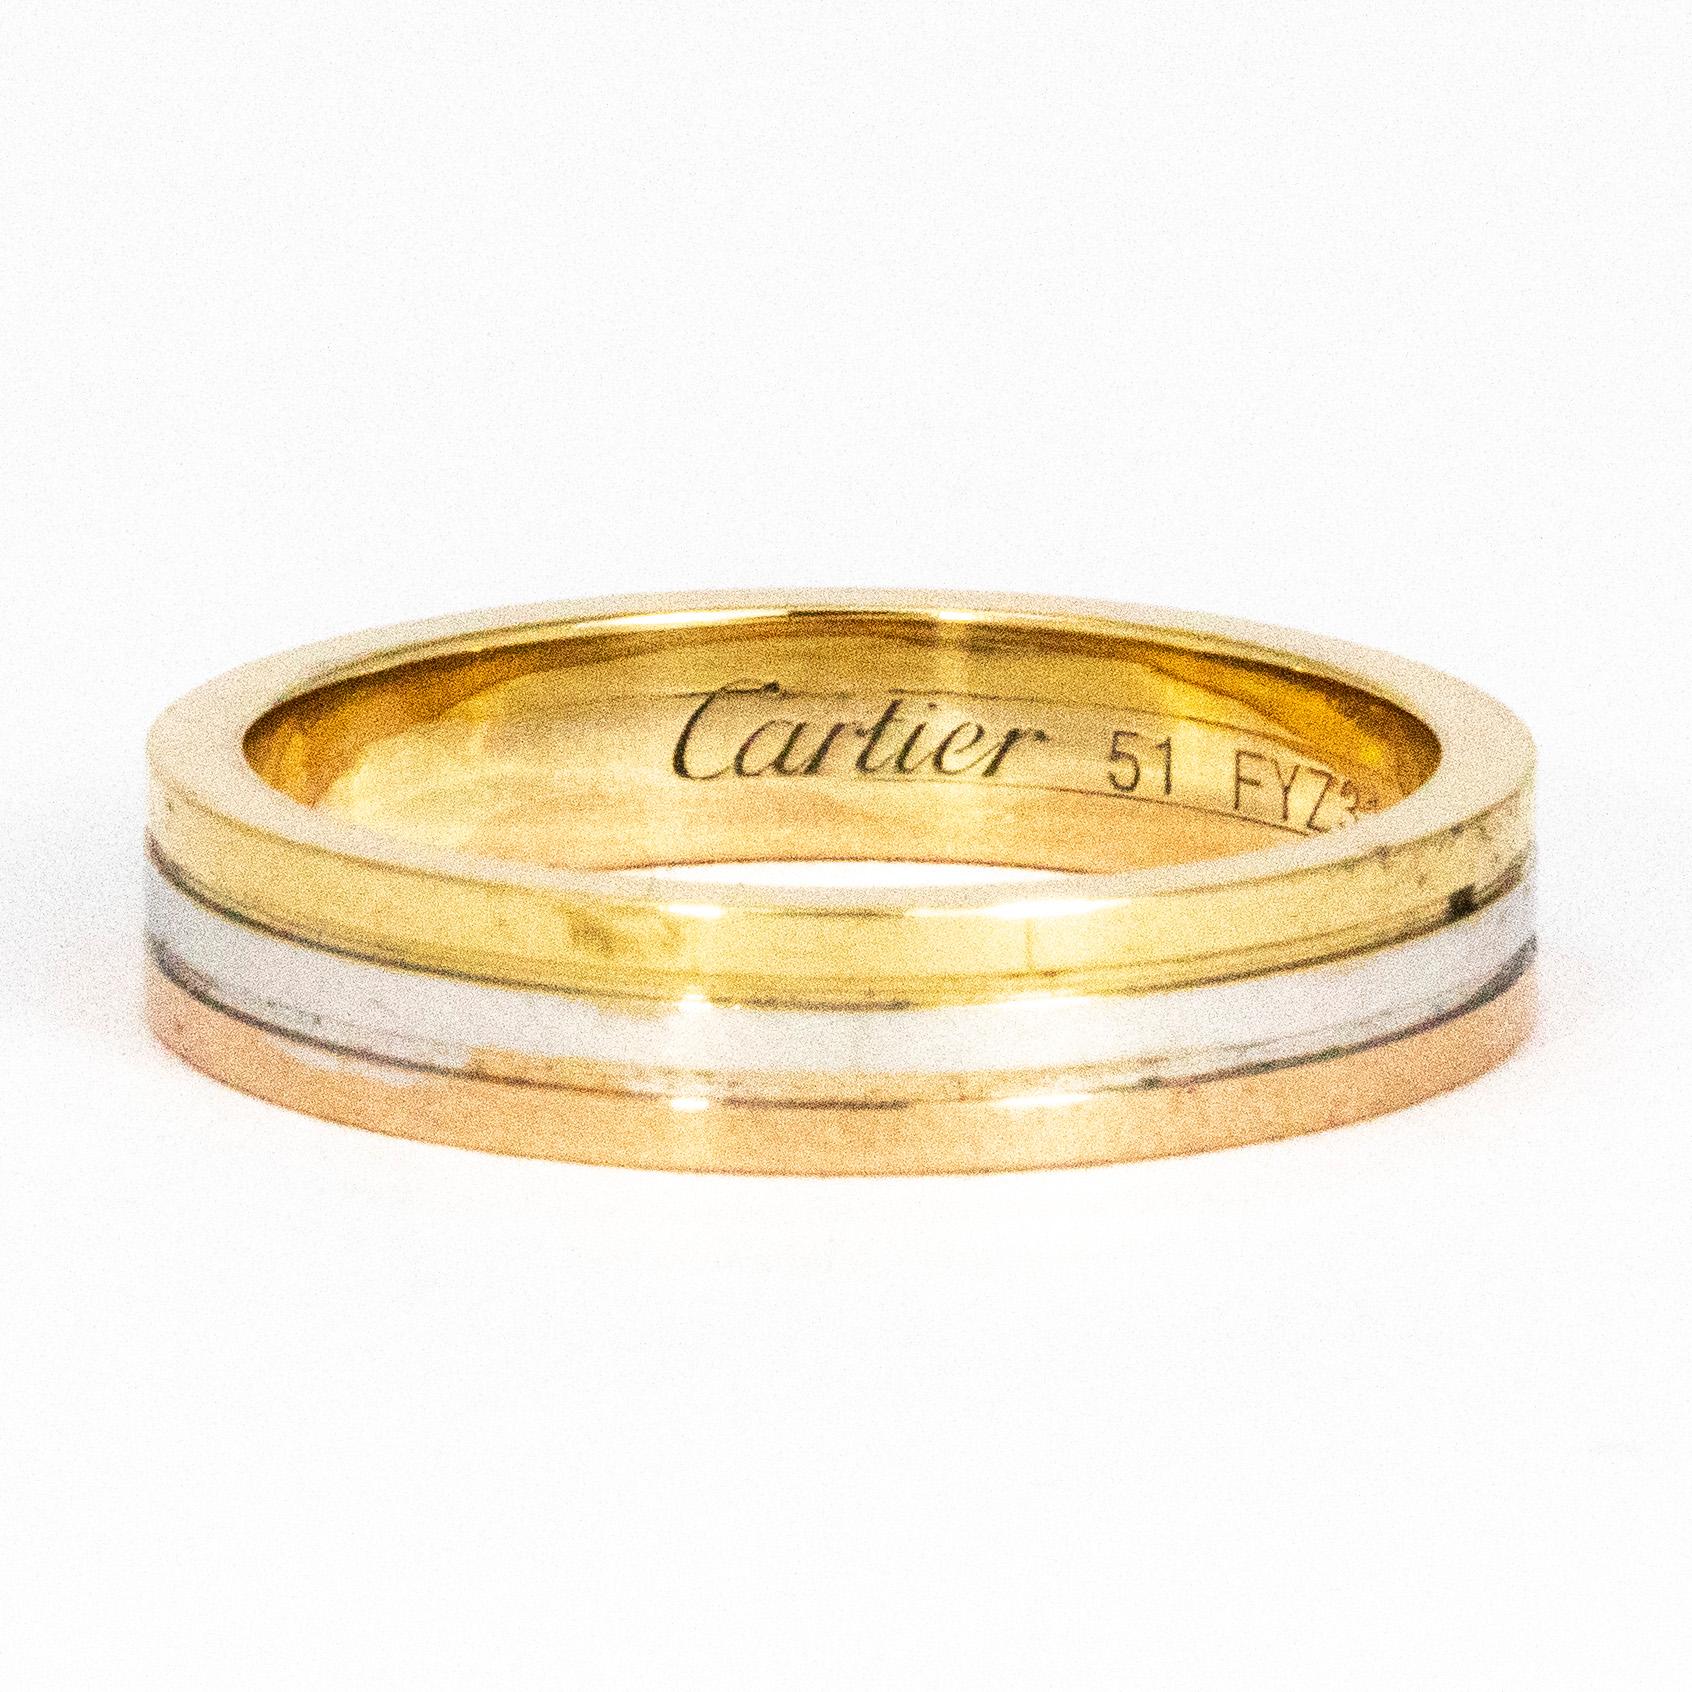 This gorgeous Cartier triple metal band features three tones of gold and is called a trinity band. The three colours are yellow gold, rose gold and white gold. The Cartier signature is inside the band as you can see on the images.

Ring Size: L 1/2